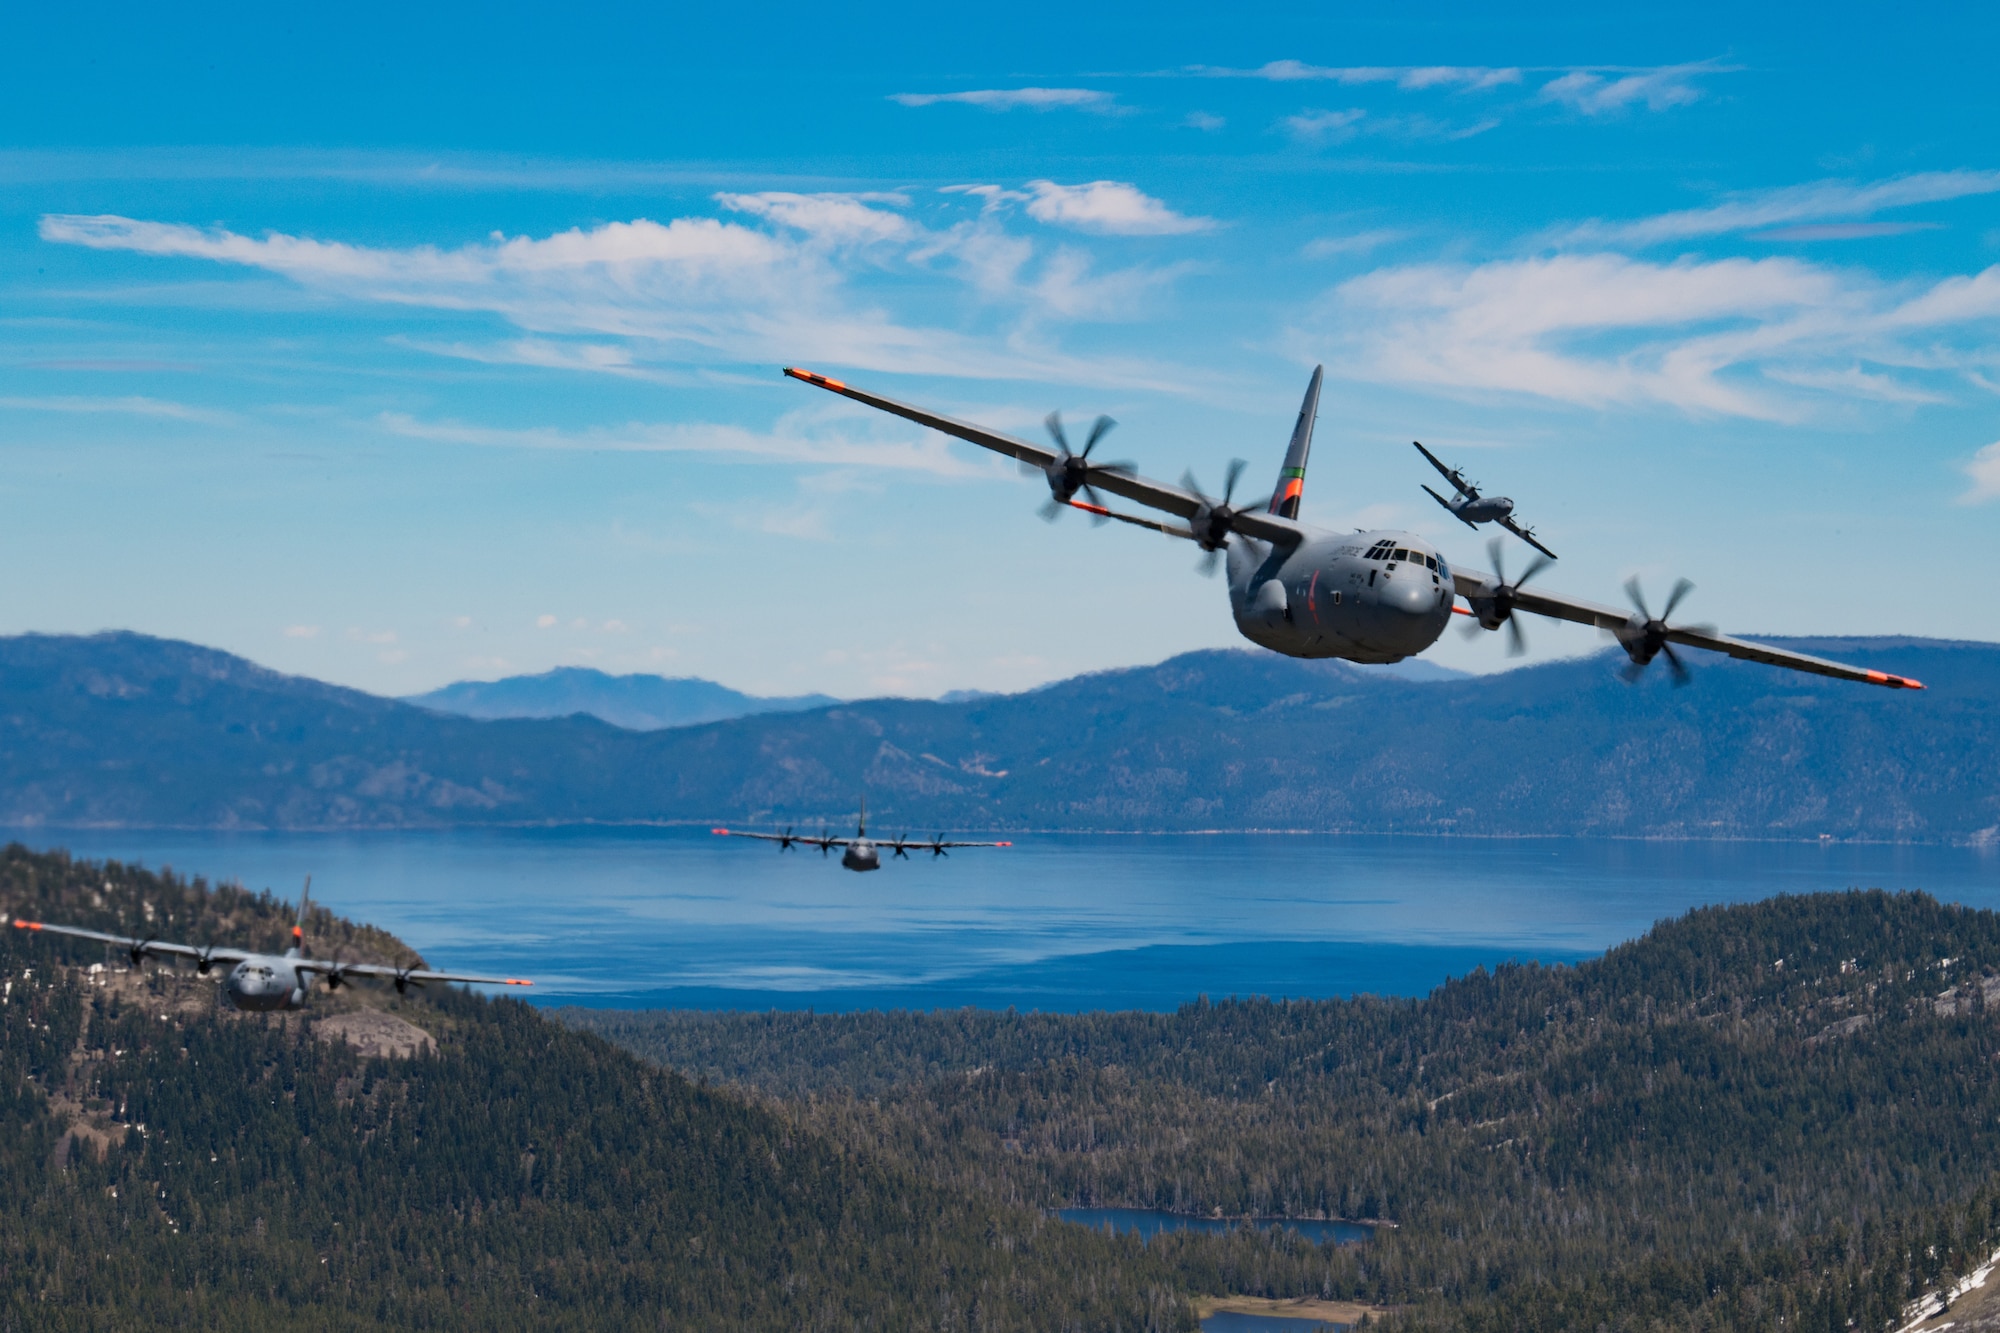 5 of 6 California Air National Guard C-130J Super Hercules aircraft fly in tight formation over the Lake Tahoe, California. May 27, 2020. California Air National Guard maintainers from the 146th Maintenance Group and aircrew from the 115th Airlift Squadron, collaborated to accomplish the launching of 6 C-130J Super Hercules aircraft for the first time in over 20 years U.S. Air National Guard by Tech. Sgt. Nieko Carzis.